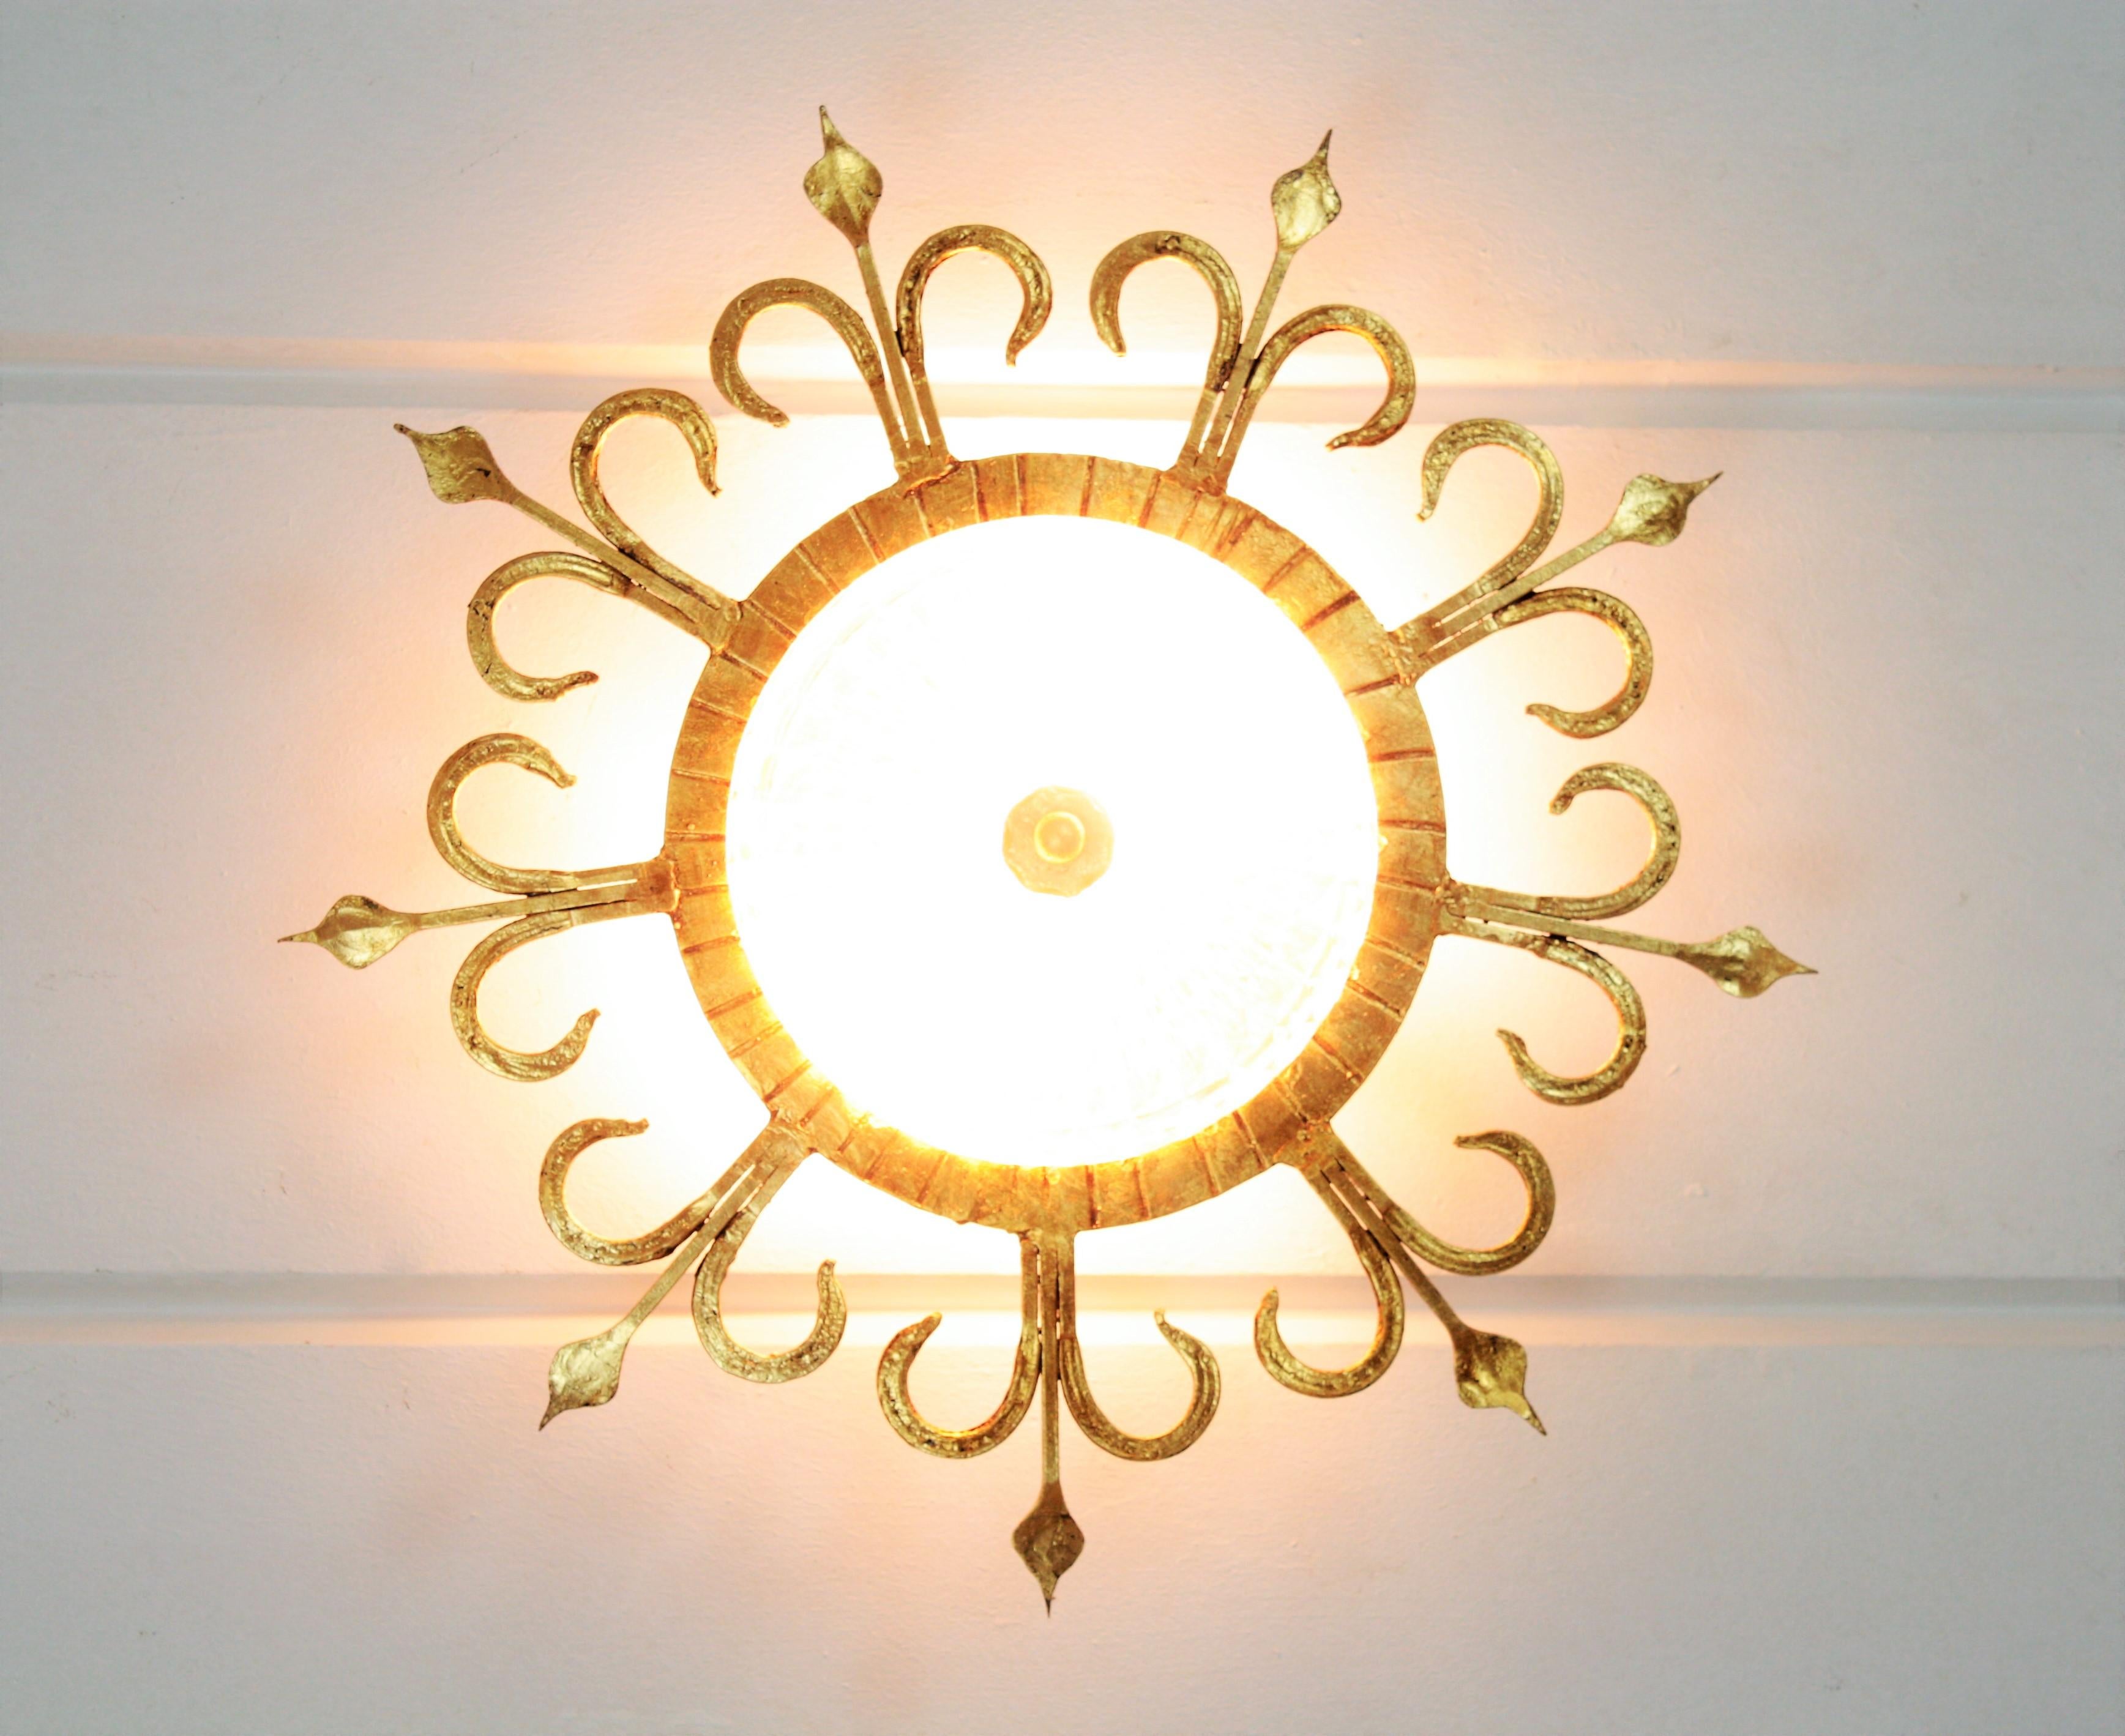 20th Century Spanish 1940s Neoclassical Gilt Iron and Glass Flush Mount Ceiling Light Fixture